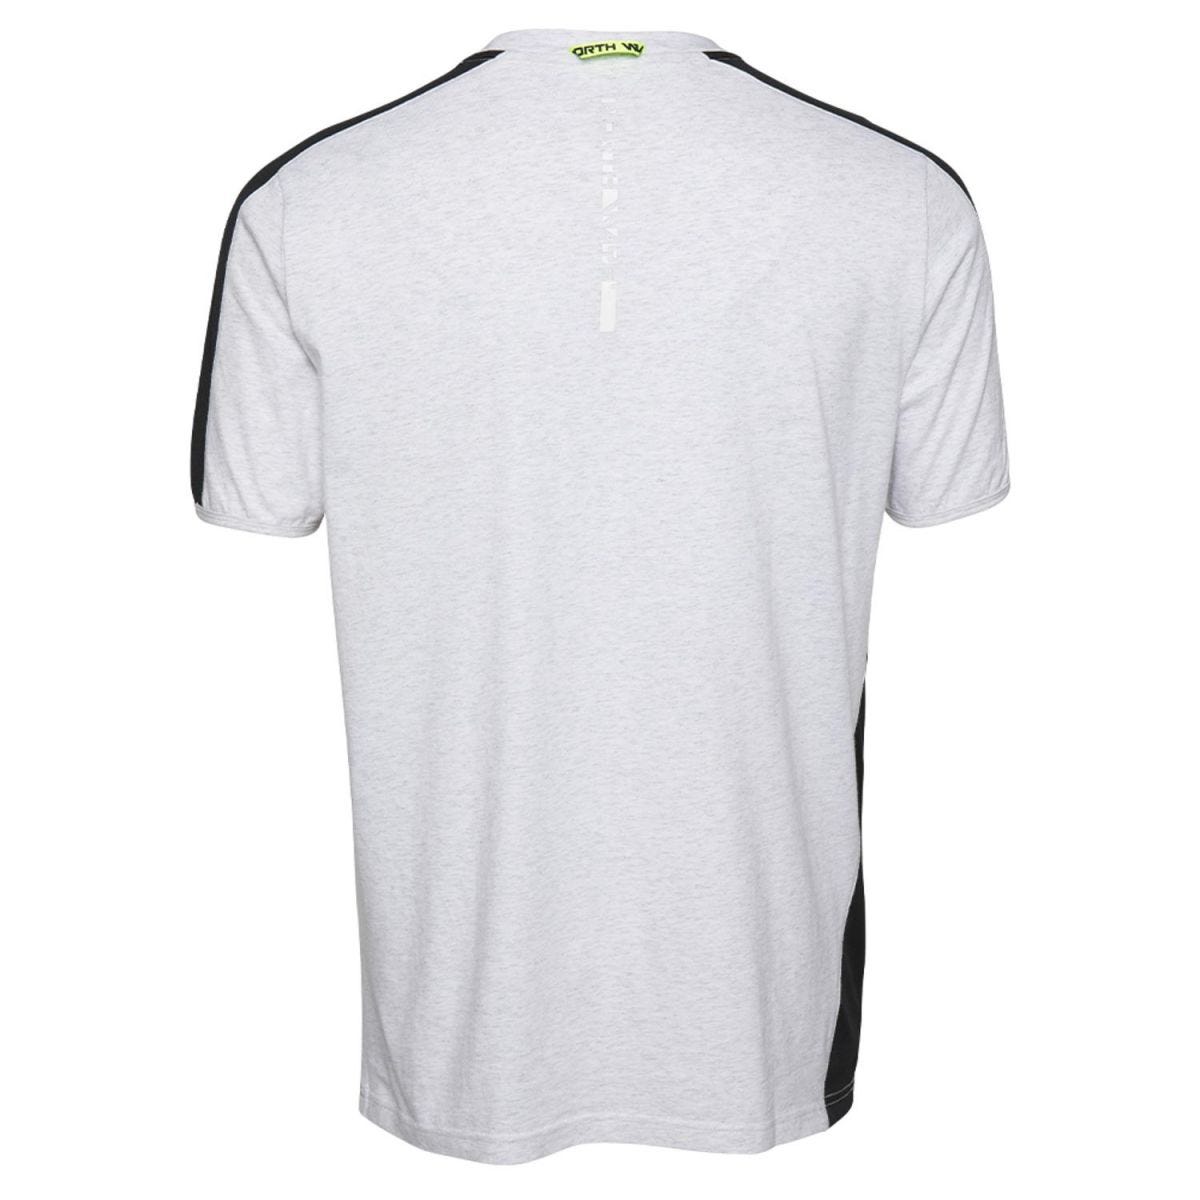 Tee-shirt à manches courtes pour homme Andy blanc chiné - North Ways - Taille M 1